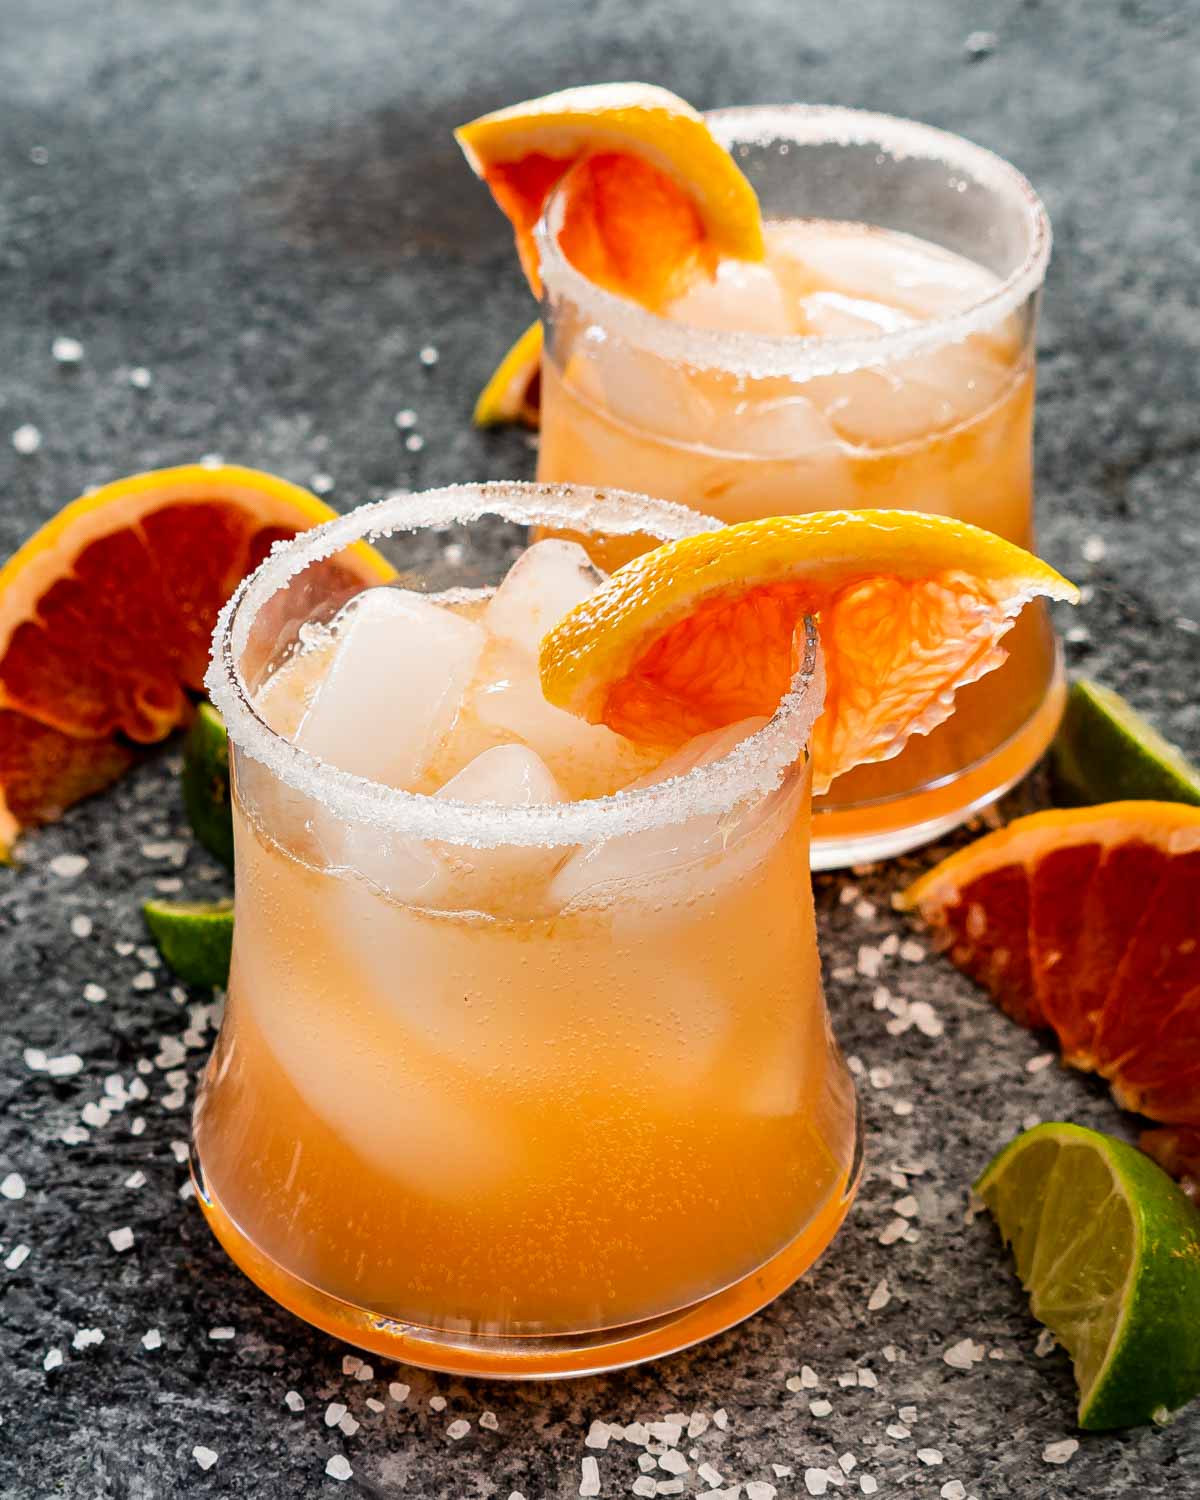 two glasses filled with paloma and garnished with grapefruit slice.